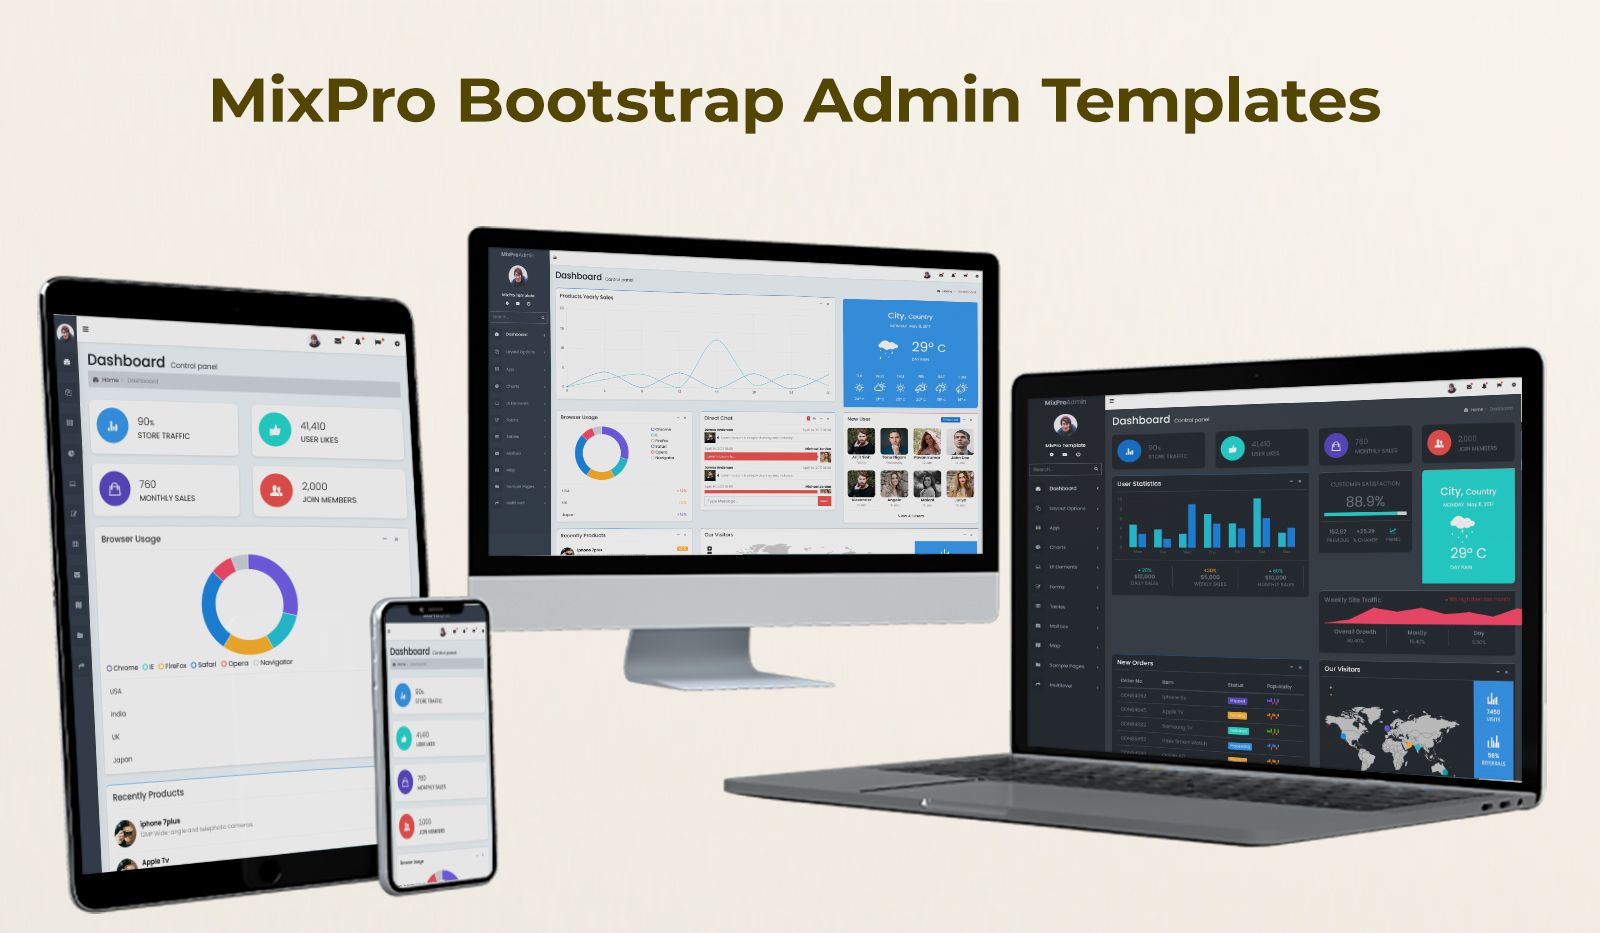 Bootstrap 4 Admin Templates Dashboard UI Kit With Bootstrap Admin Web App – MixPro